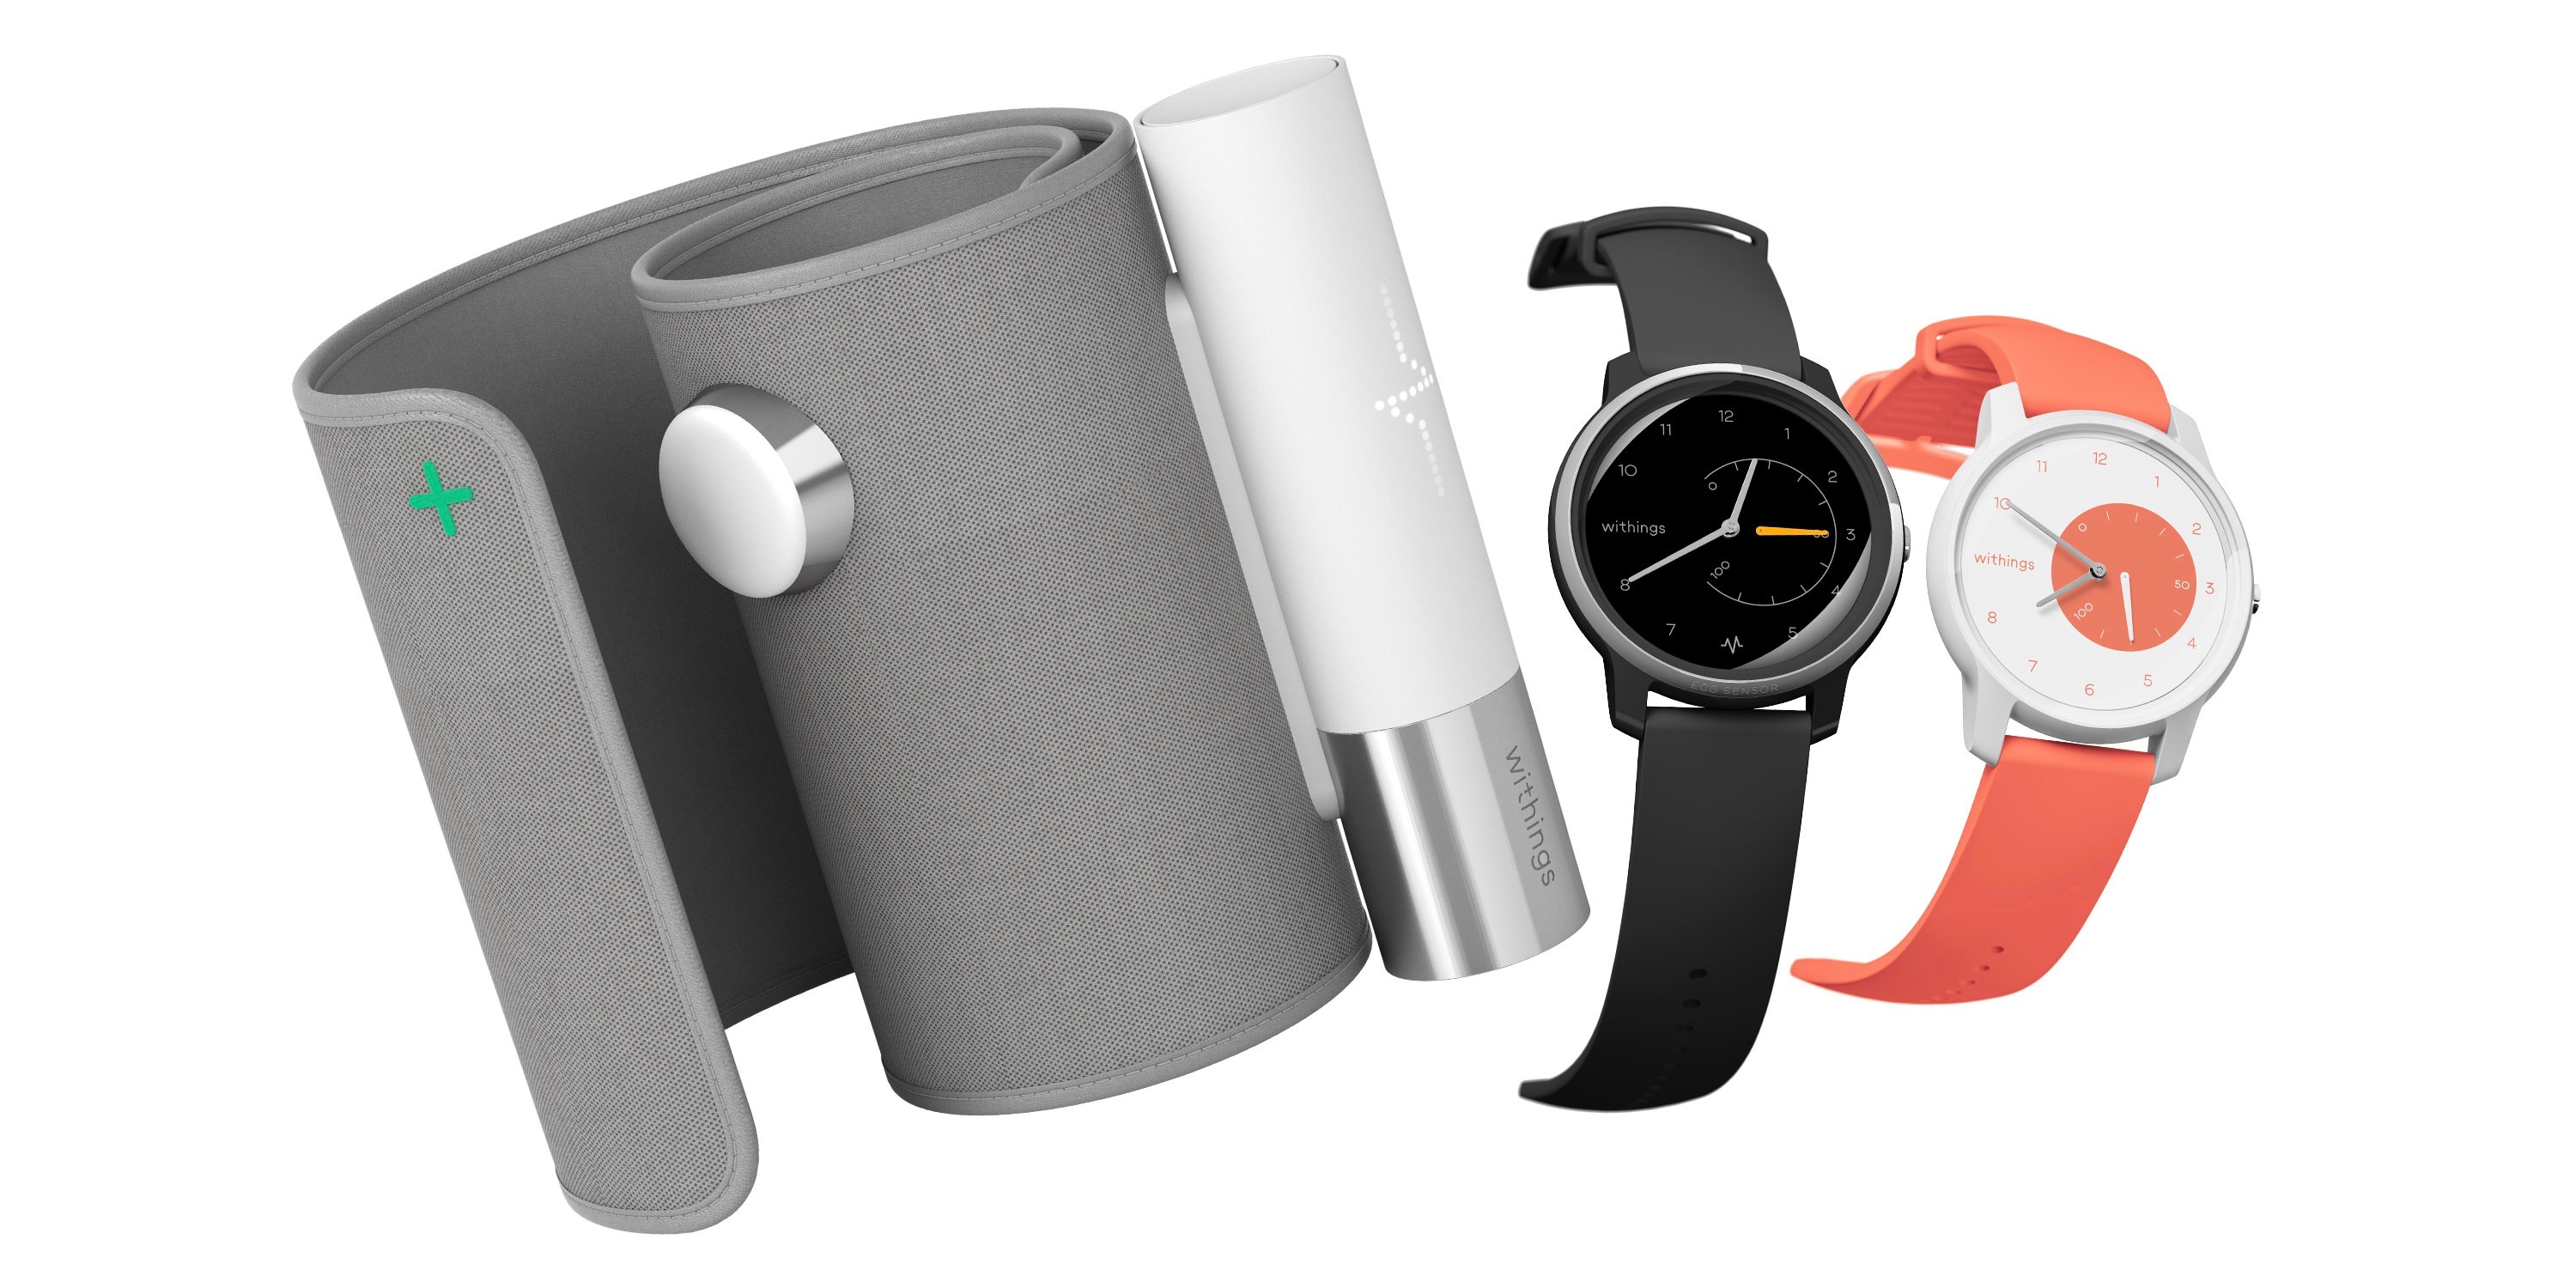 Withings brings ECGs to its new analog smartwatch and blood monitor, launches affordable smartwatch with month battery life - 9to5Mac